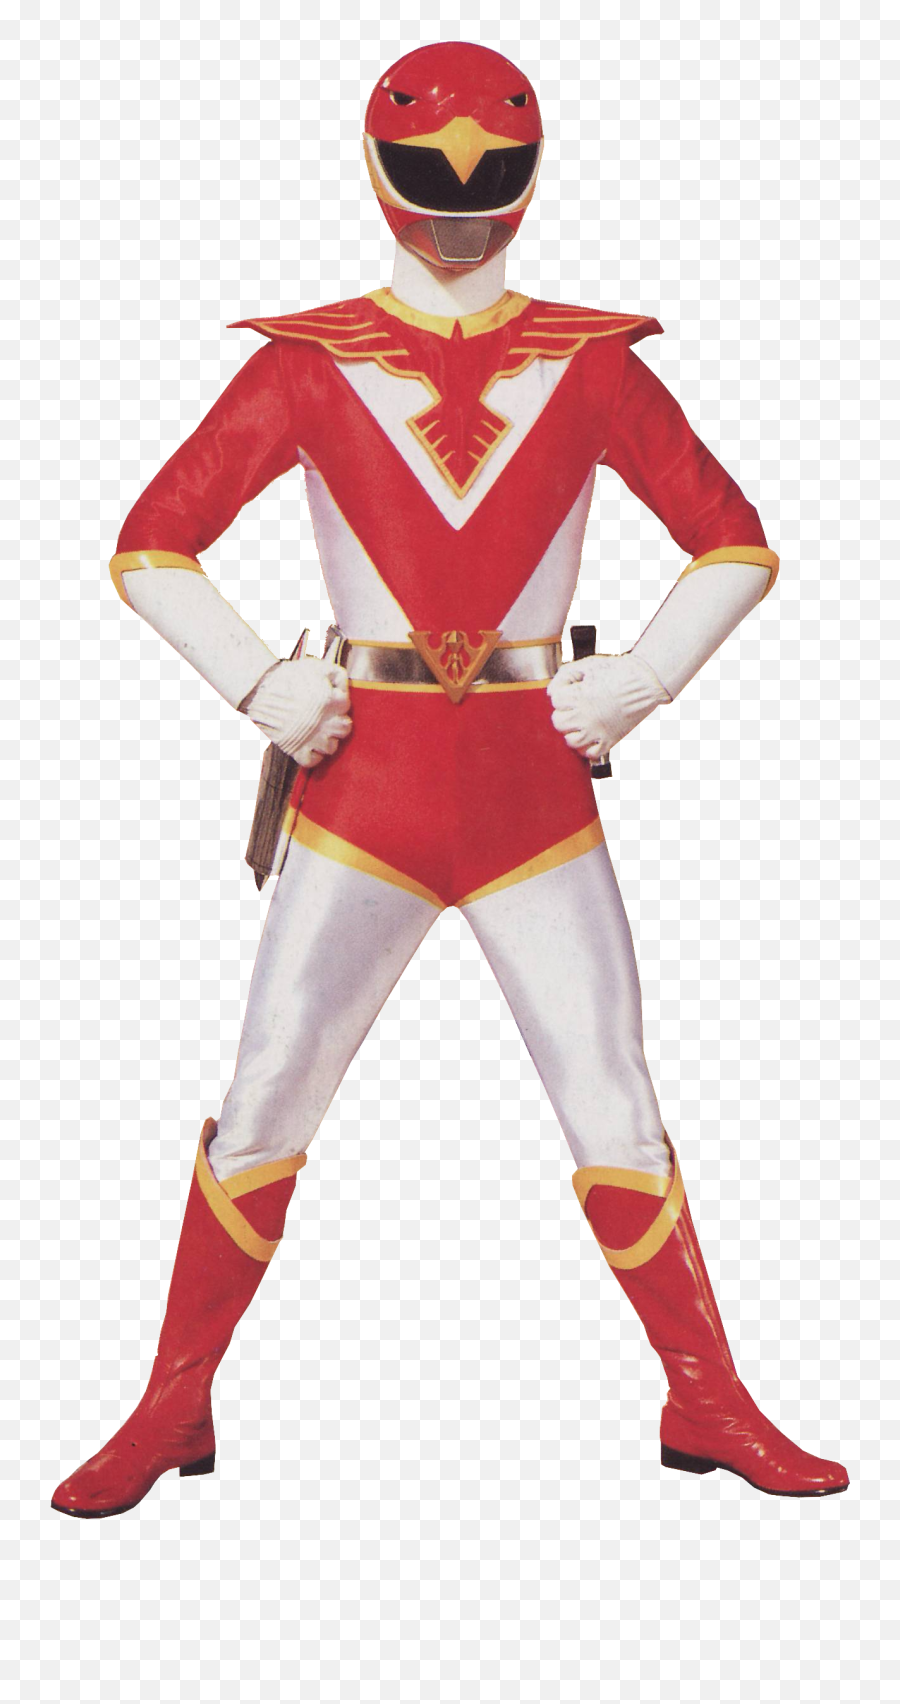 Red Power Ranger Png Picture - Chjin Sentai Jetman Red,Red Power Ranger Png